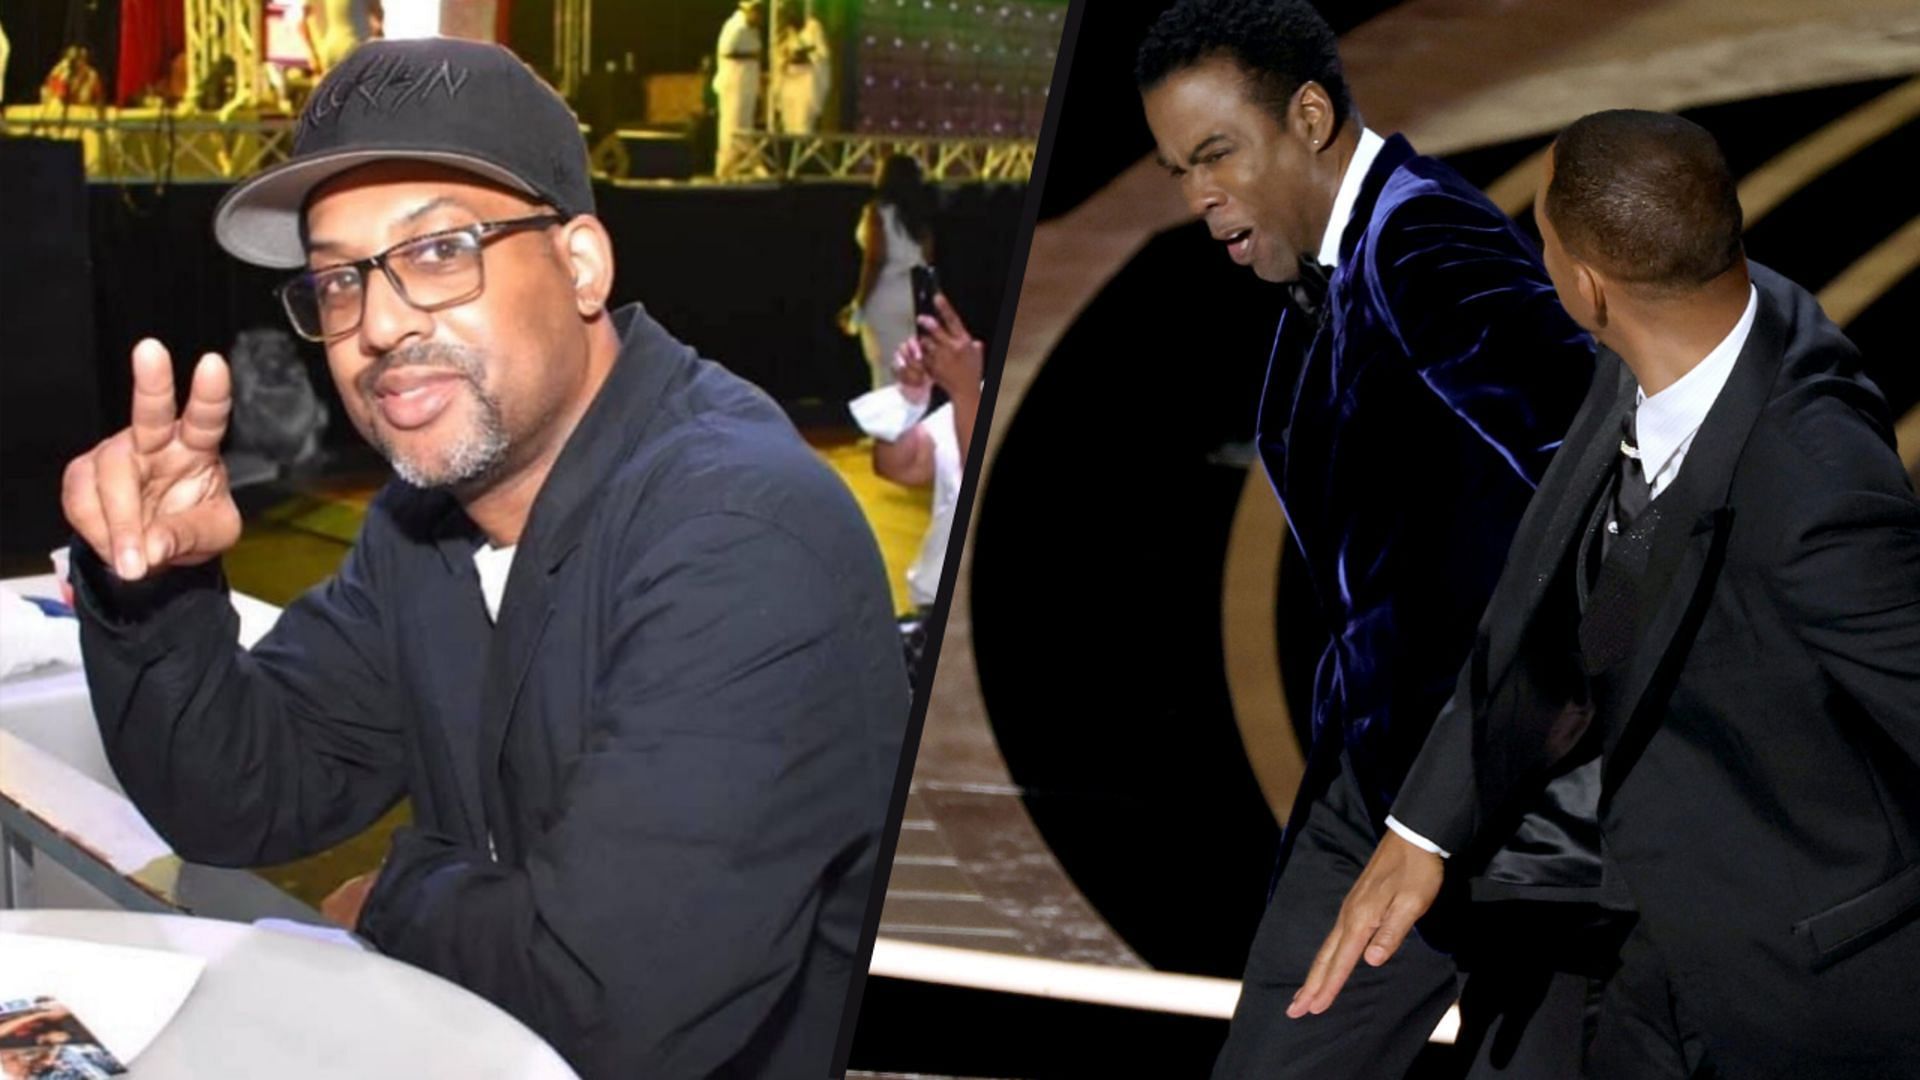 Kenny Rock opens up about his elder brother Chris Rock being slapped by Will Smith (Image via therealkennyrock/Instagram, and Neilson Barnard/Getty Images)